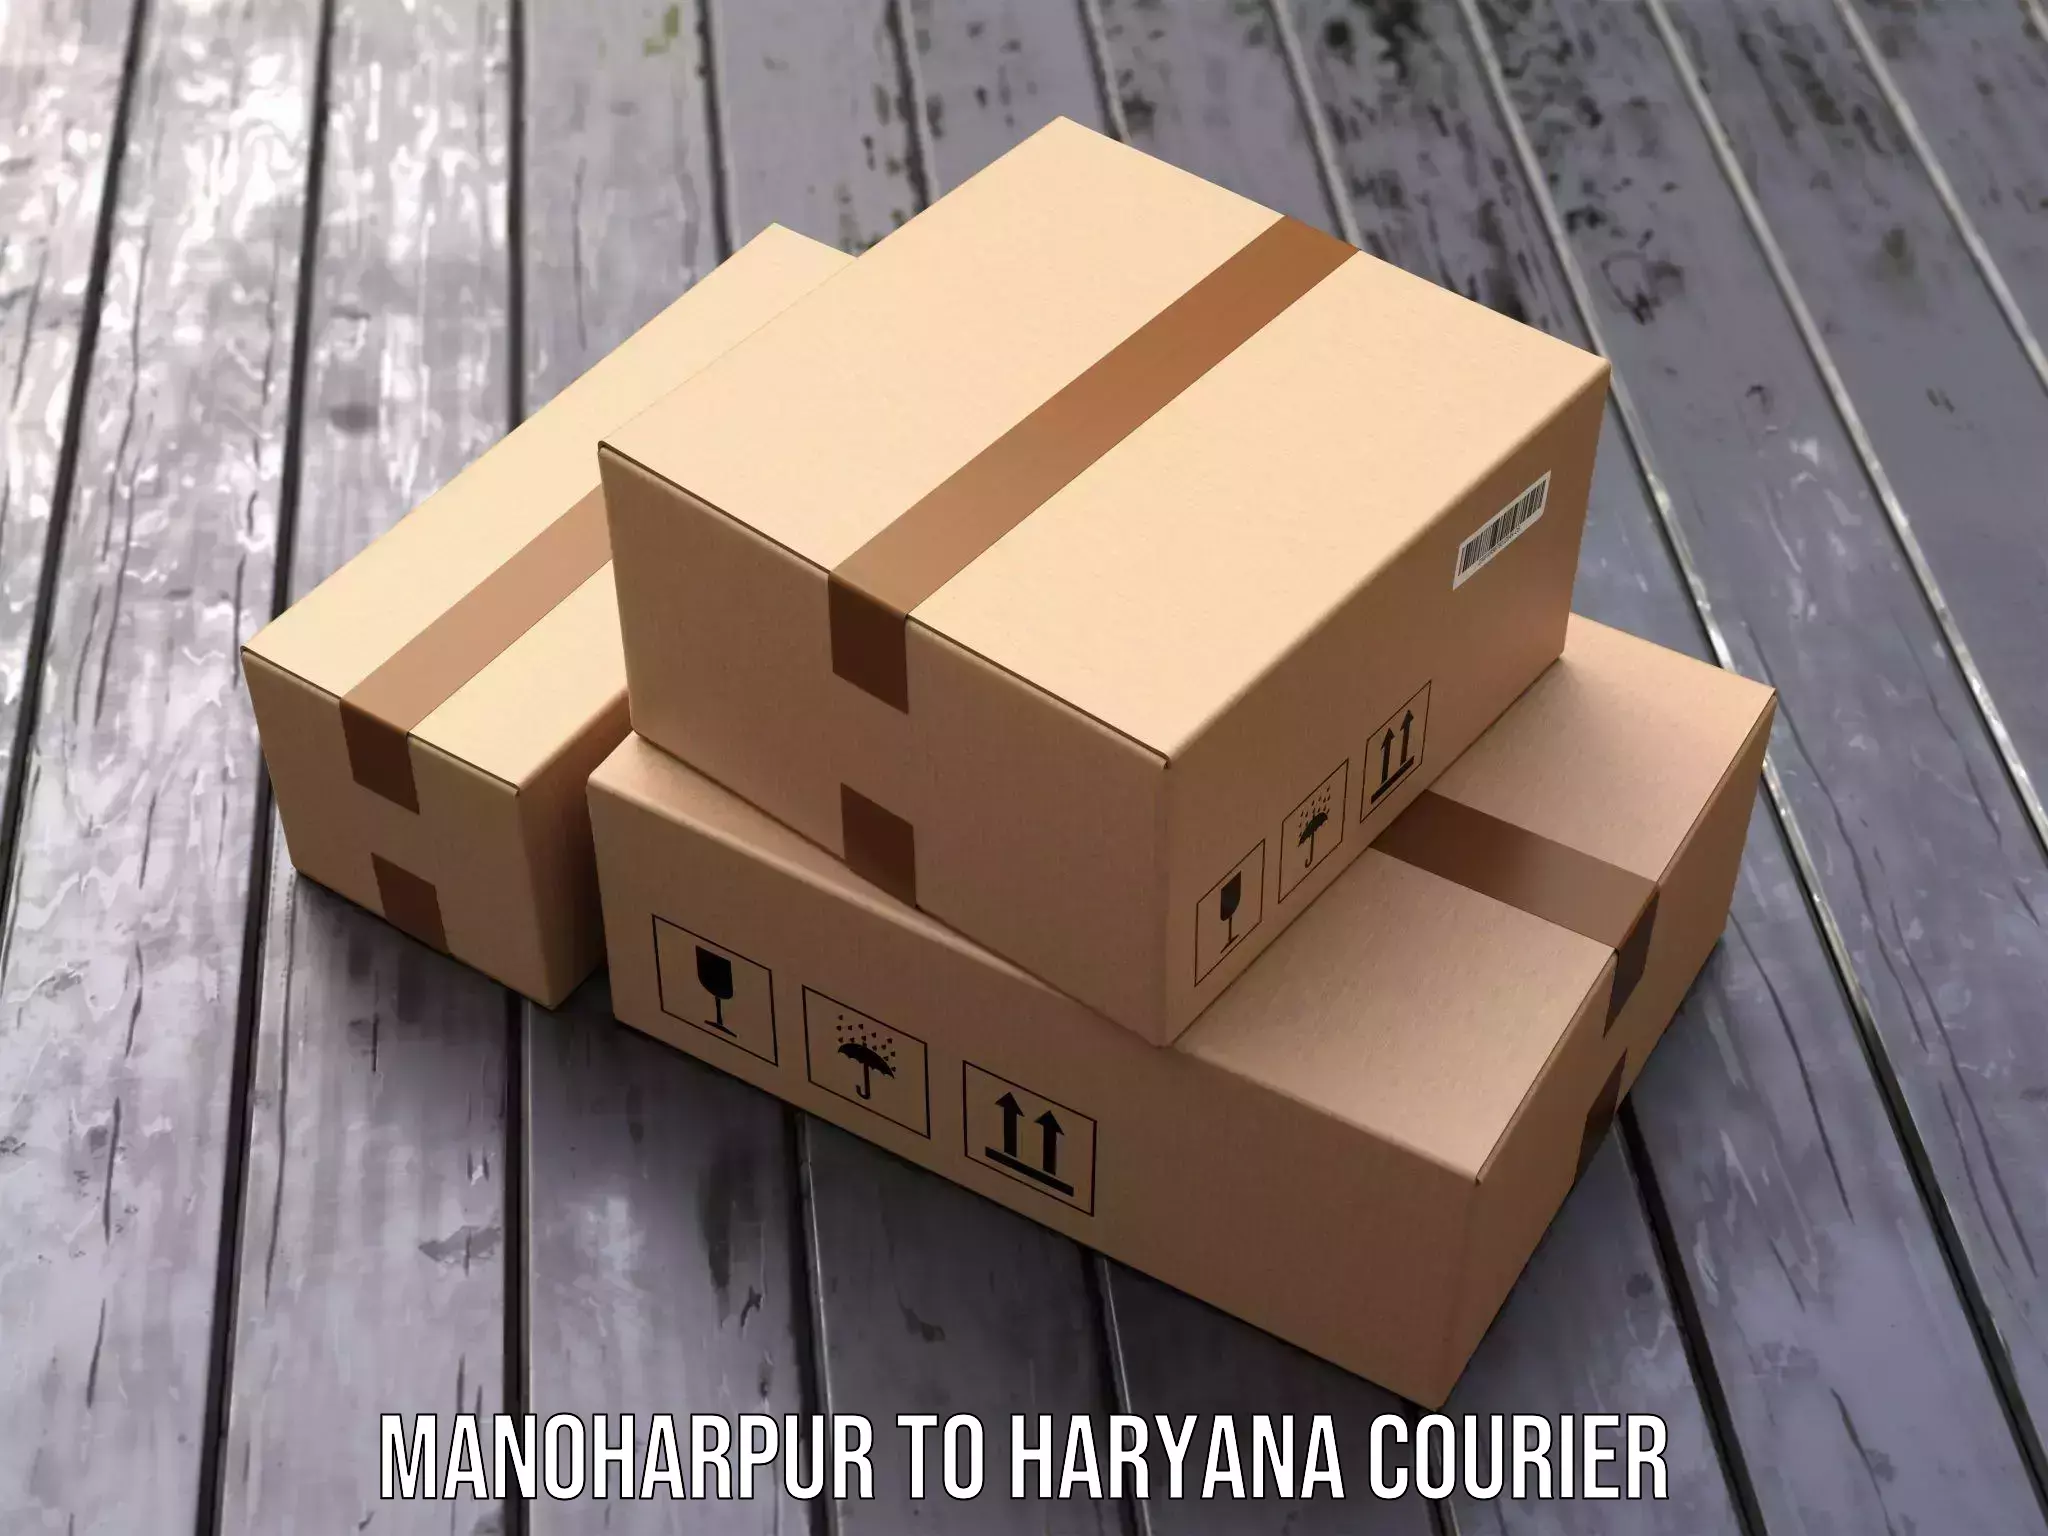 Subscription-based courier Manoharpur to Haryana